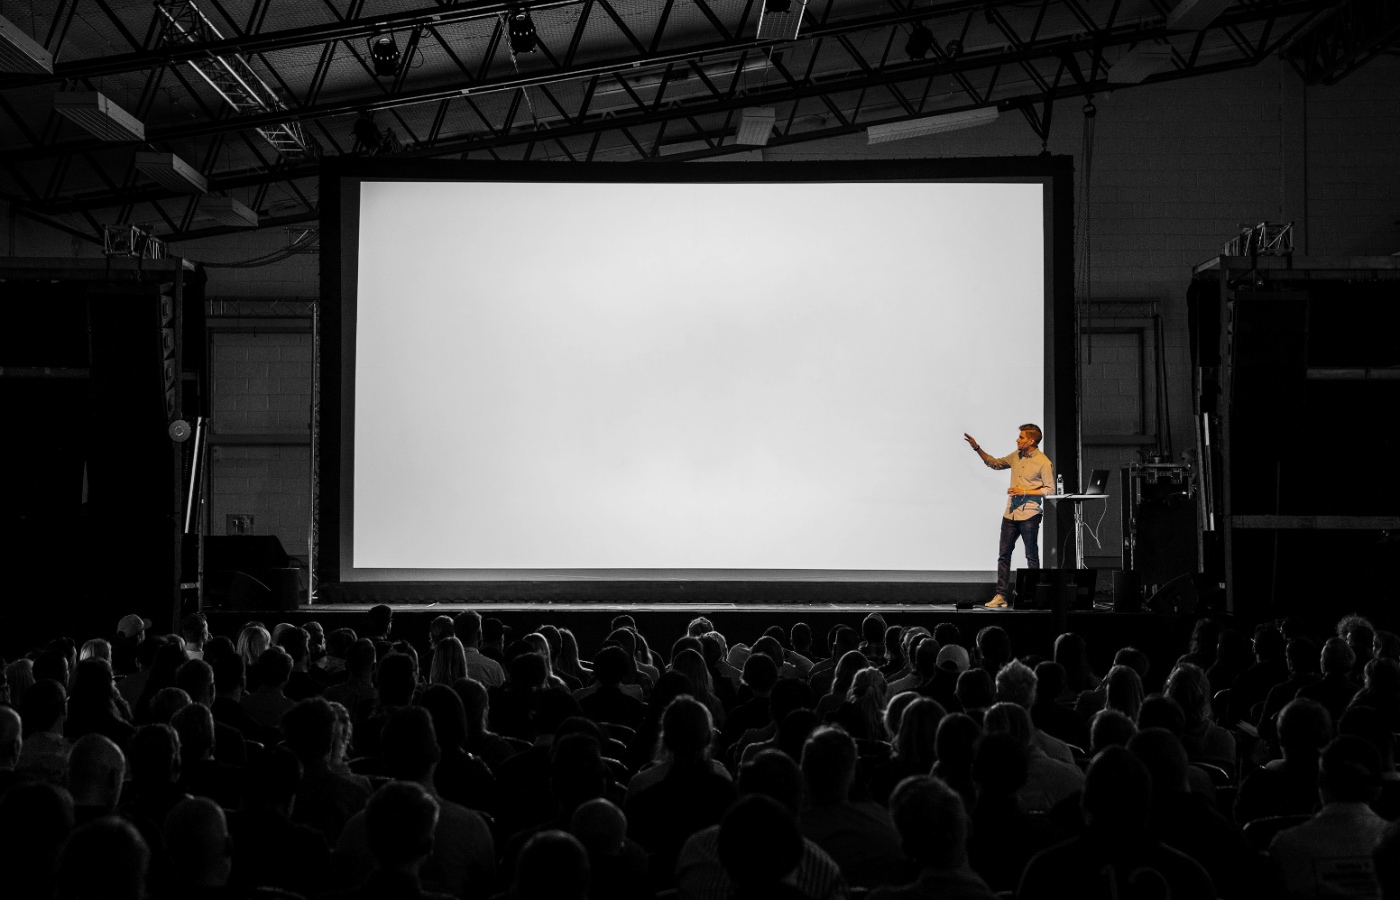 A man standing on a stage in front of a large audience, with a blank screen behind him